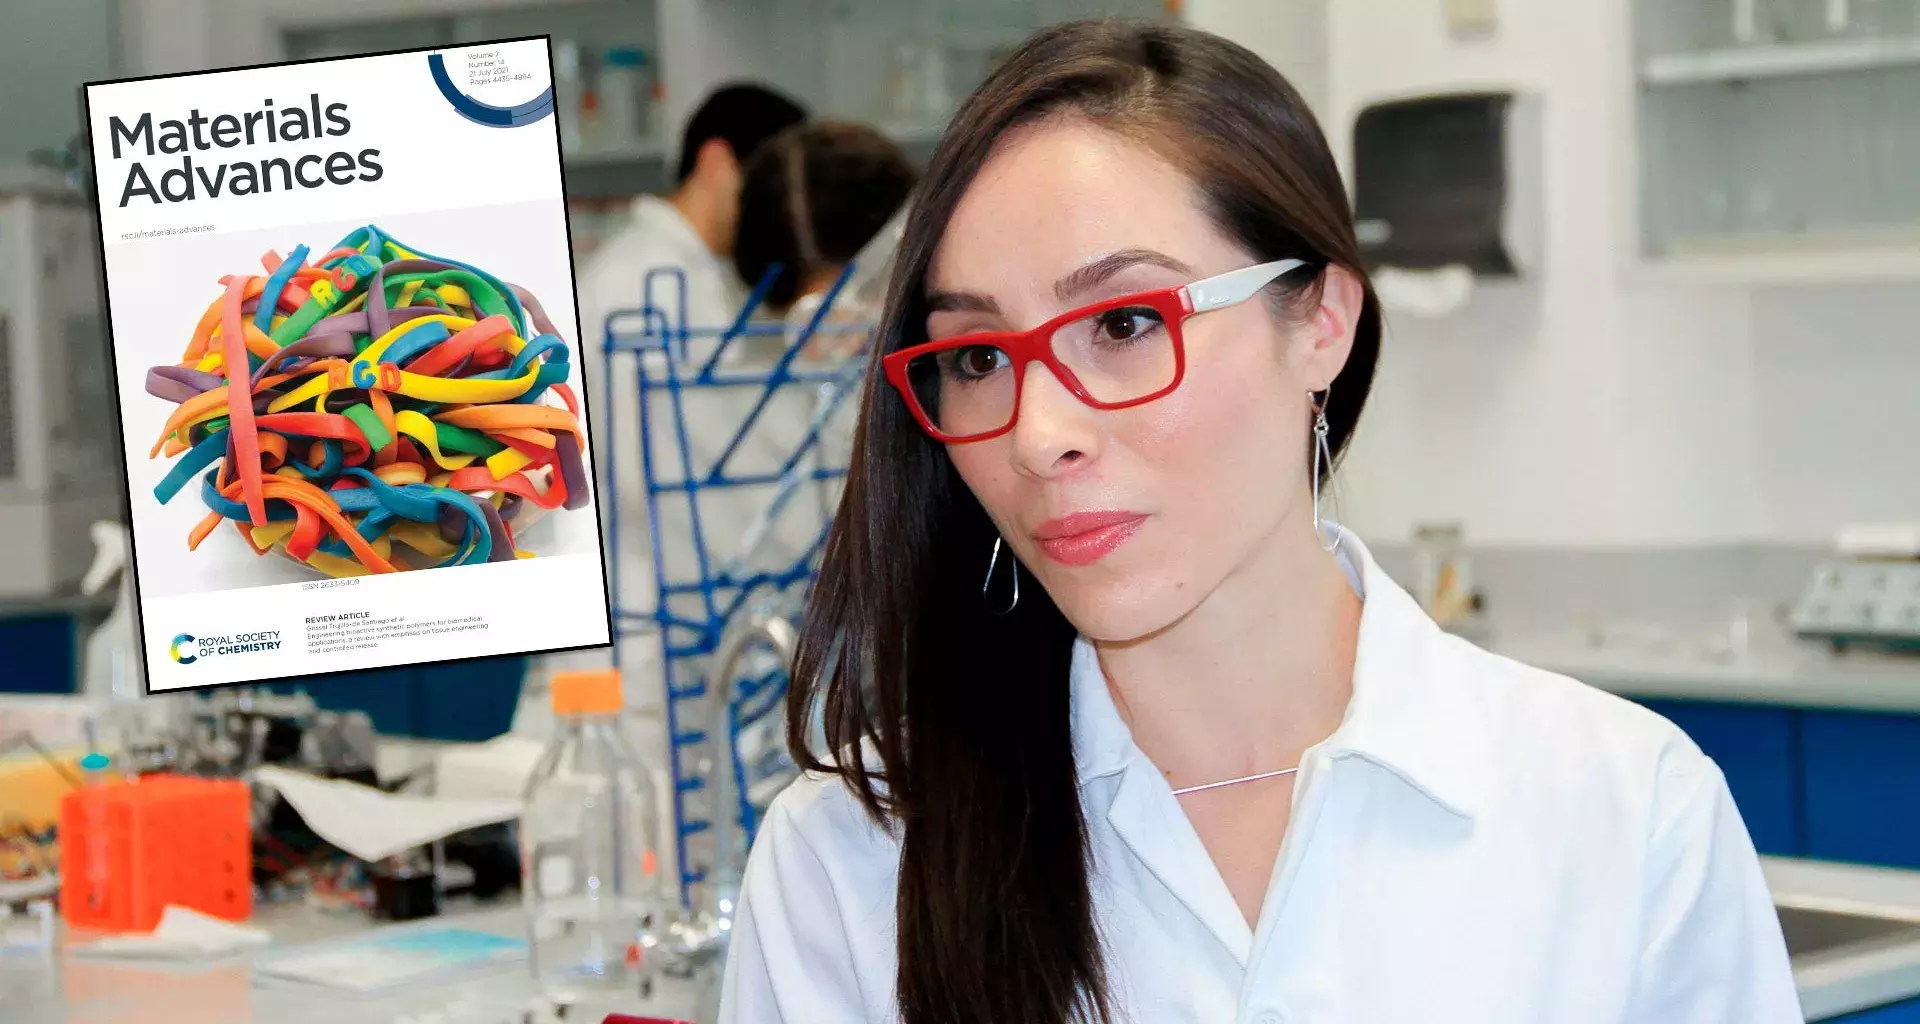 Mexican researcher wins and designs the cover of a scientific journal